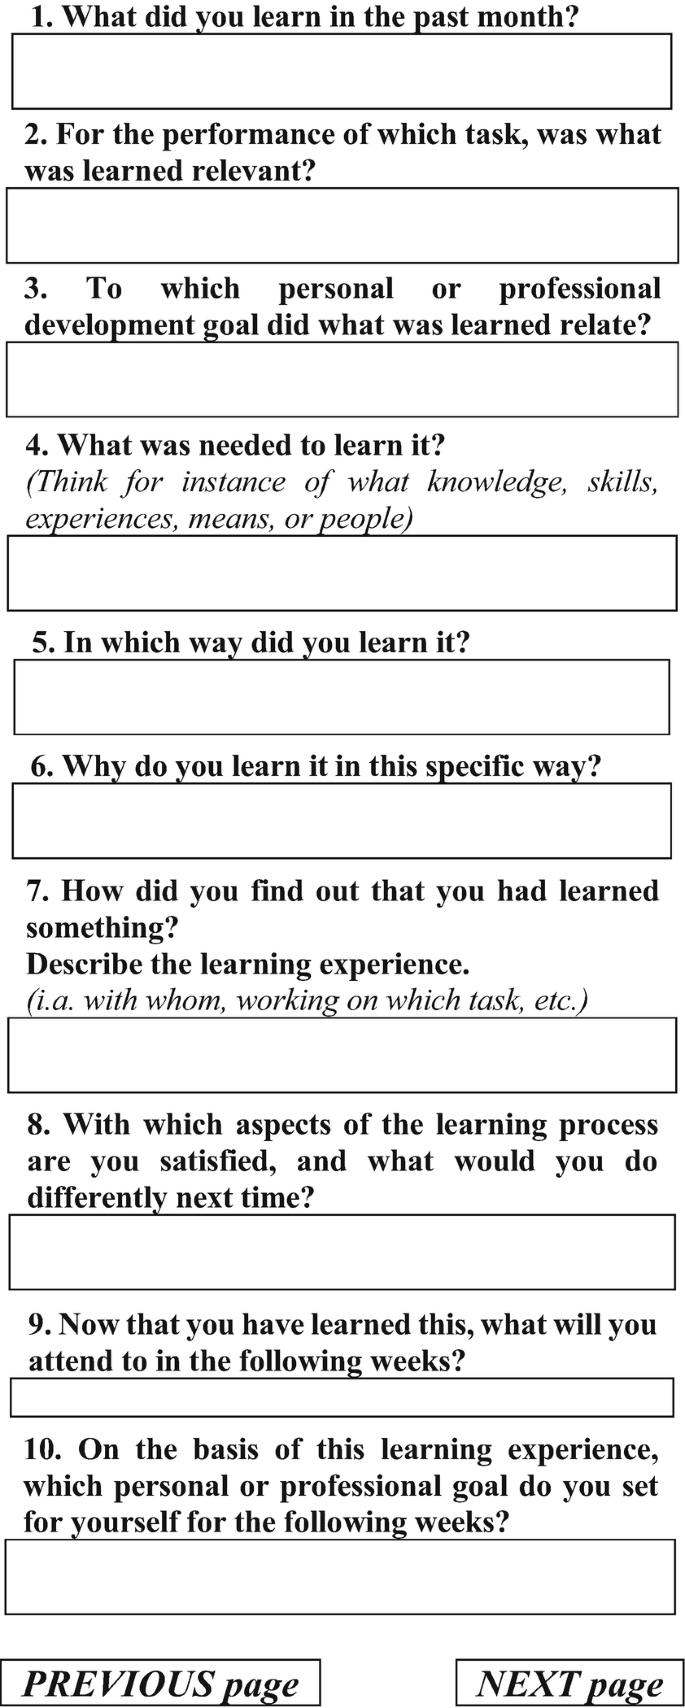 The text has 10 direct questions. Below are the buttons for the previous page and the next page.